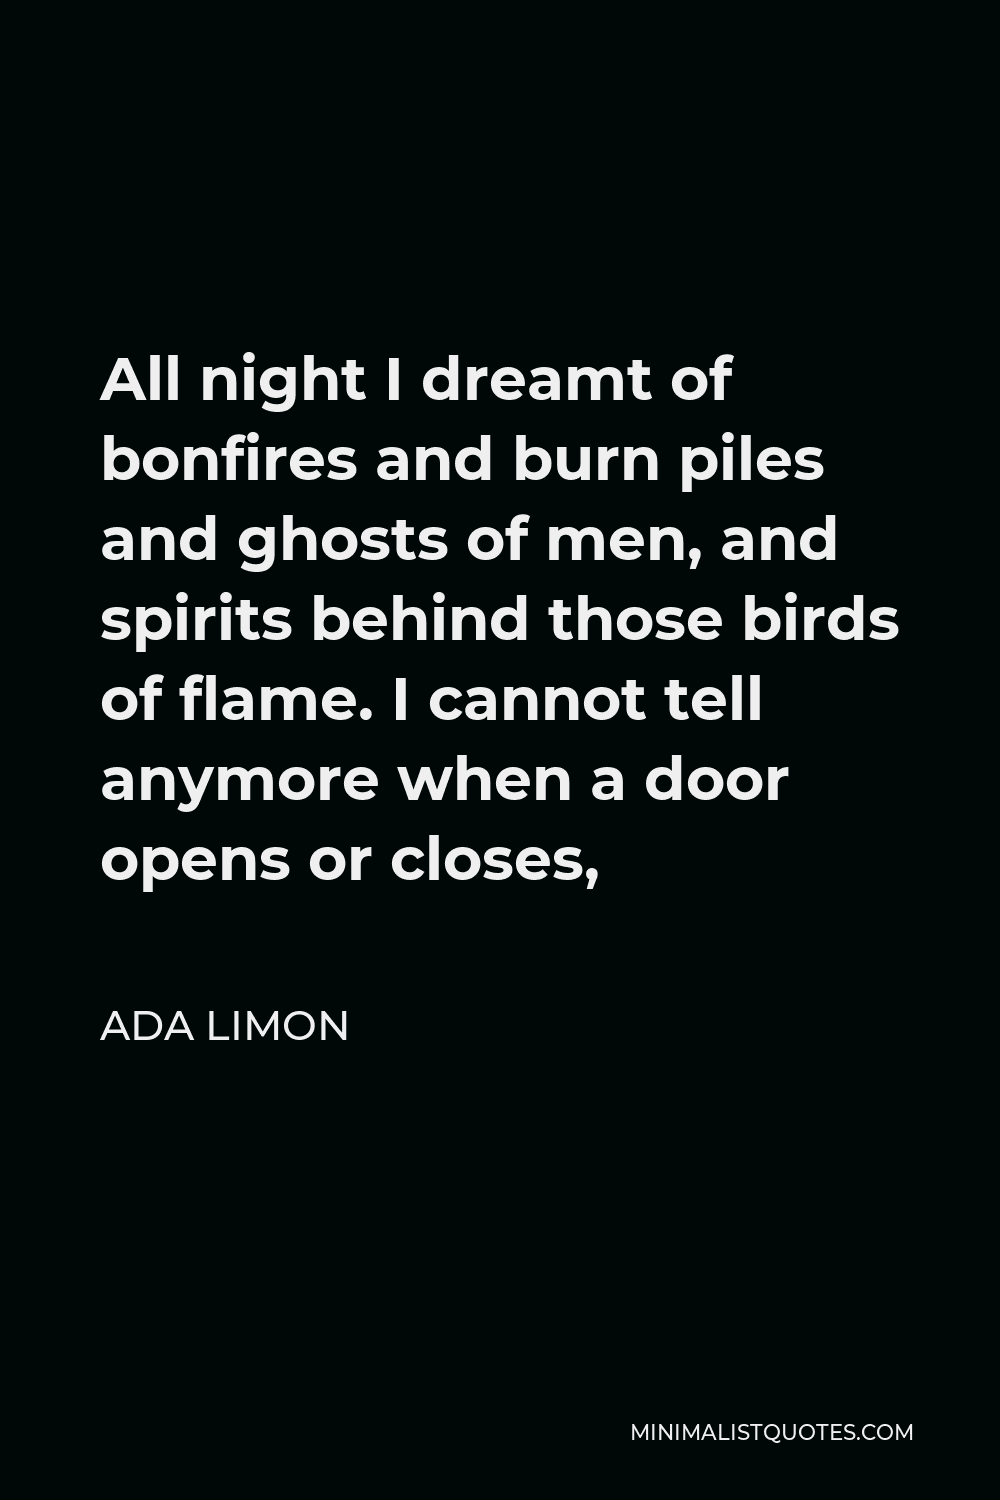 Ada Limon Quote - All night I dreamt of bonfires and burn piles and ghosts of men, and spirits behind those birds of flame. I cannot tell anymore when a door opens or closes,